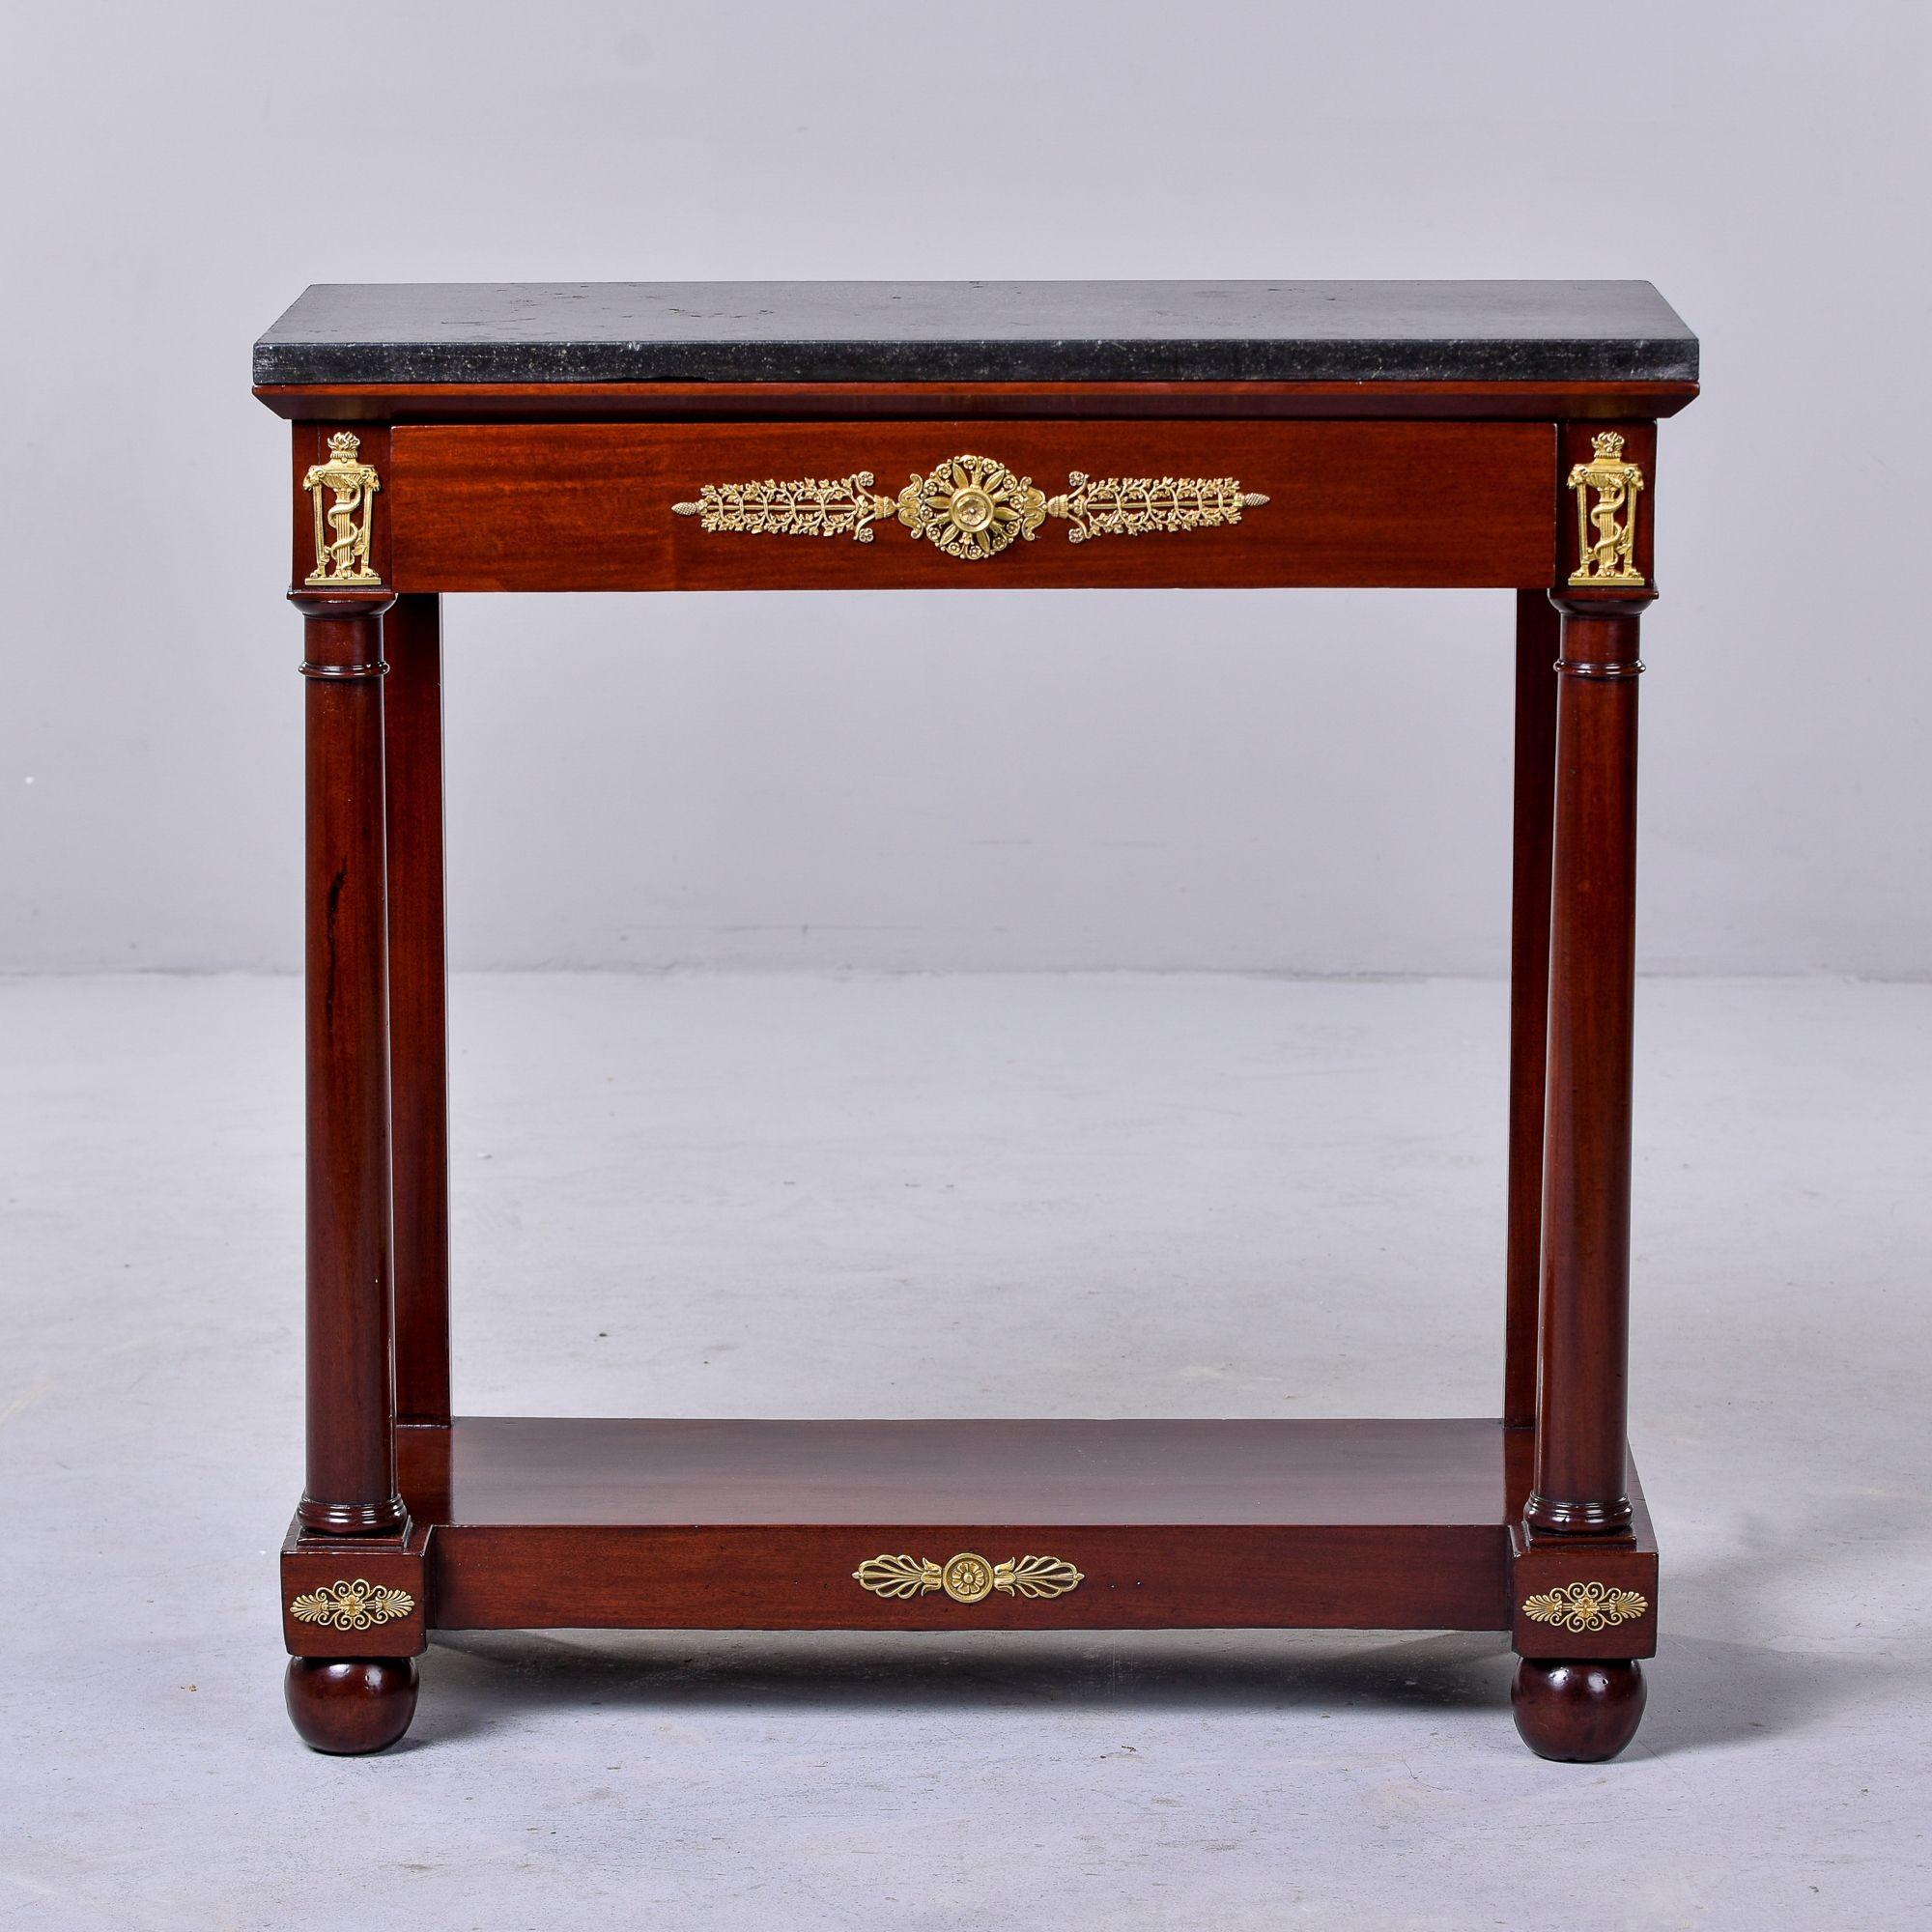 Found in France, this circa 1890s console has a mahogany base with gilt bronze decorative mounts, ball feet on the front, a single drawer with dovetail construction and a black slate top. Unknown maker. 
 
Overall very good antique condition -